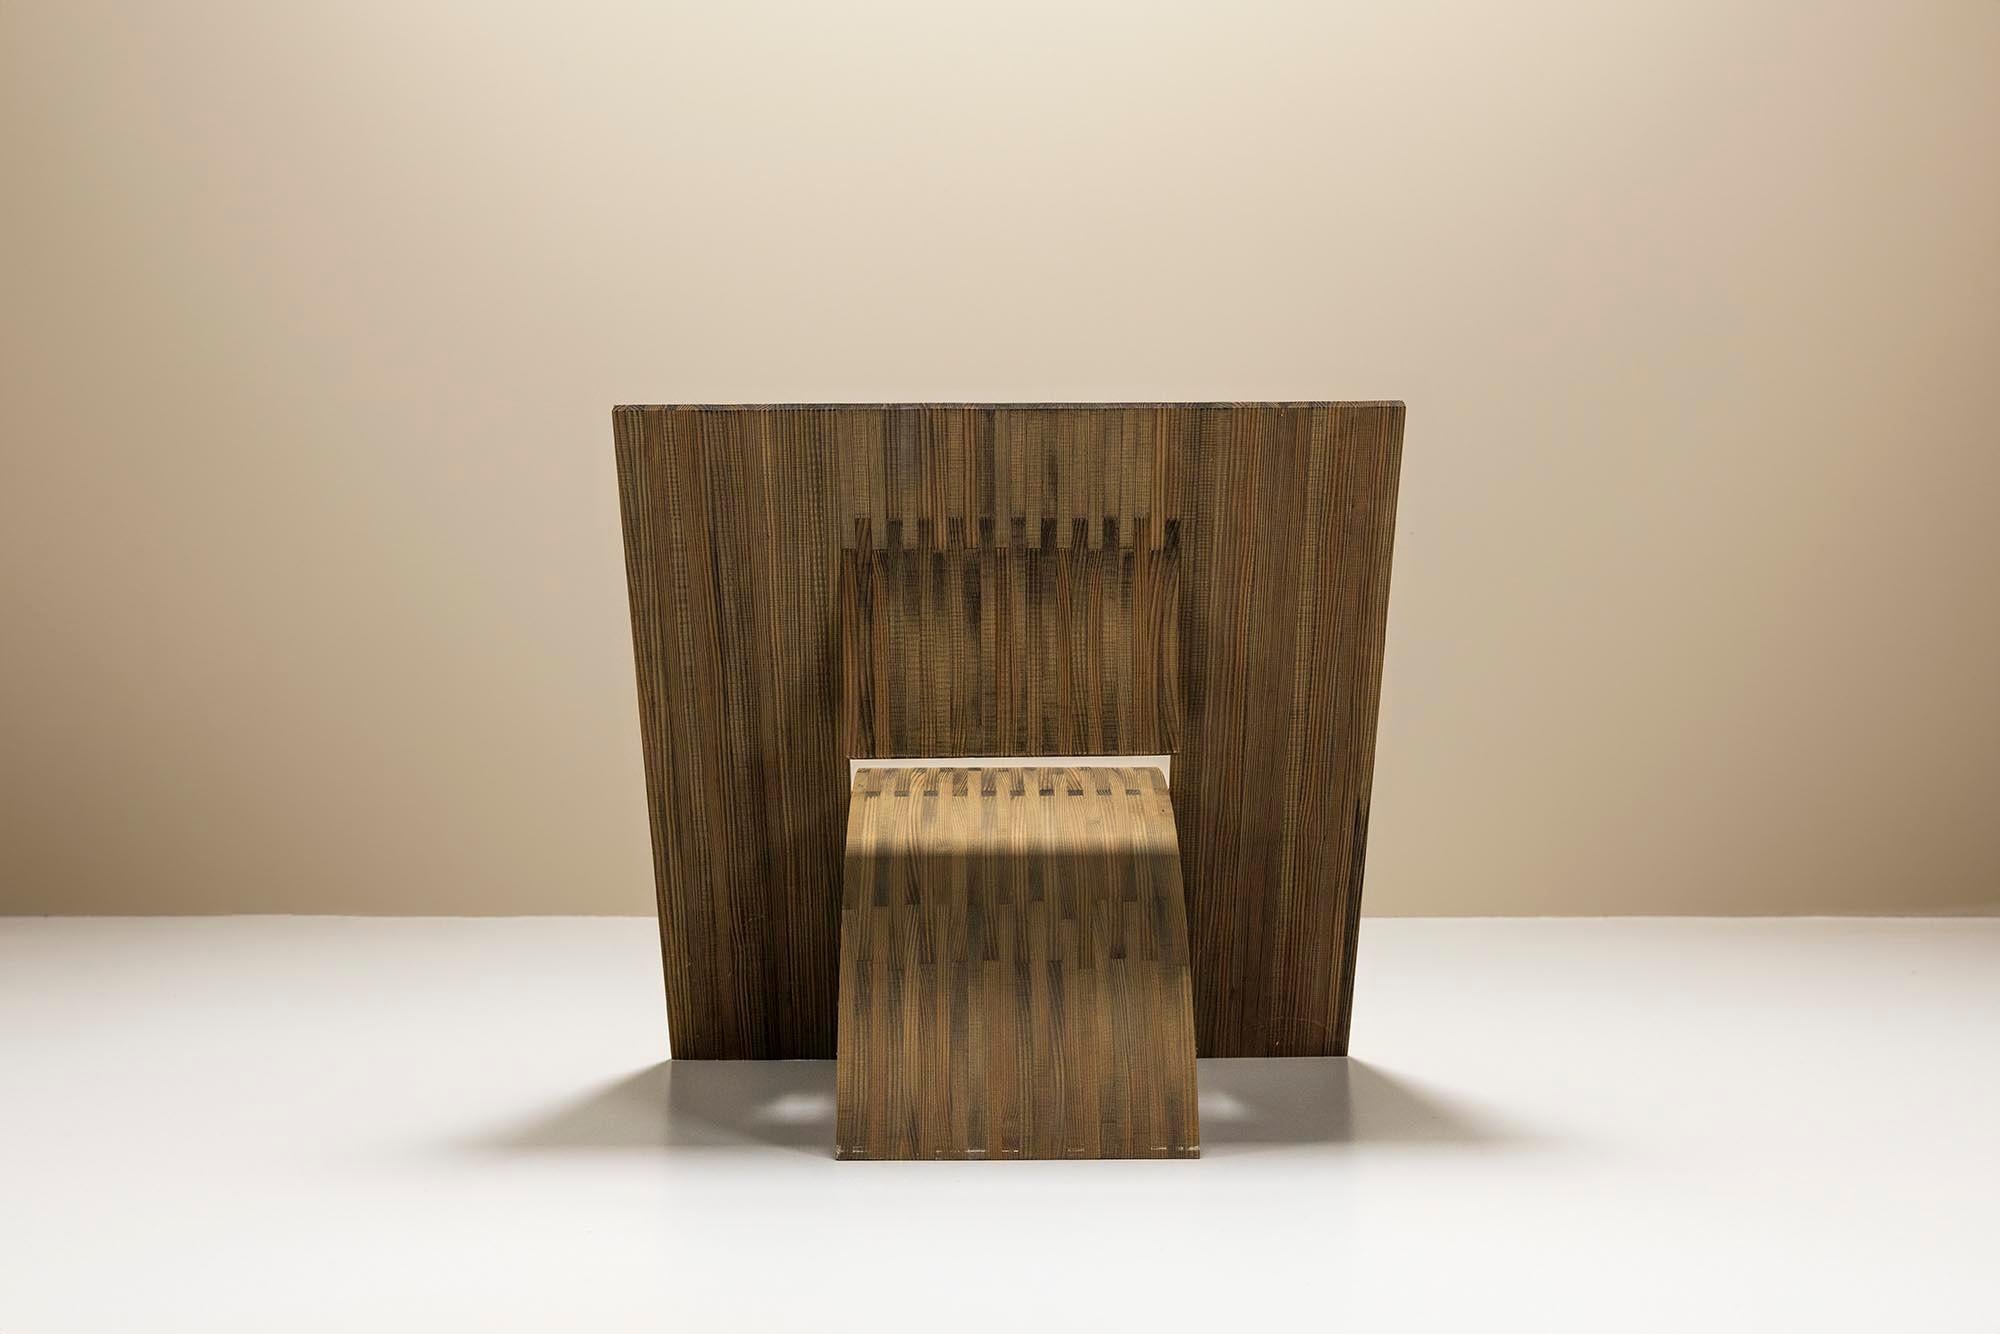 Post-Modern Deconstructivist Angled Square Chair in Wood, Netherlands 1980s For Sale